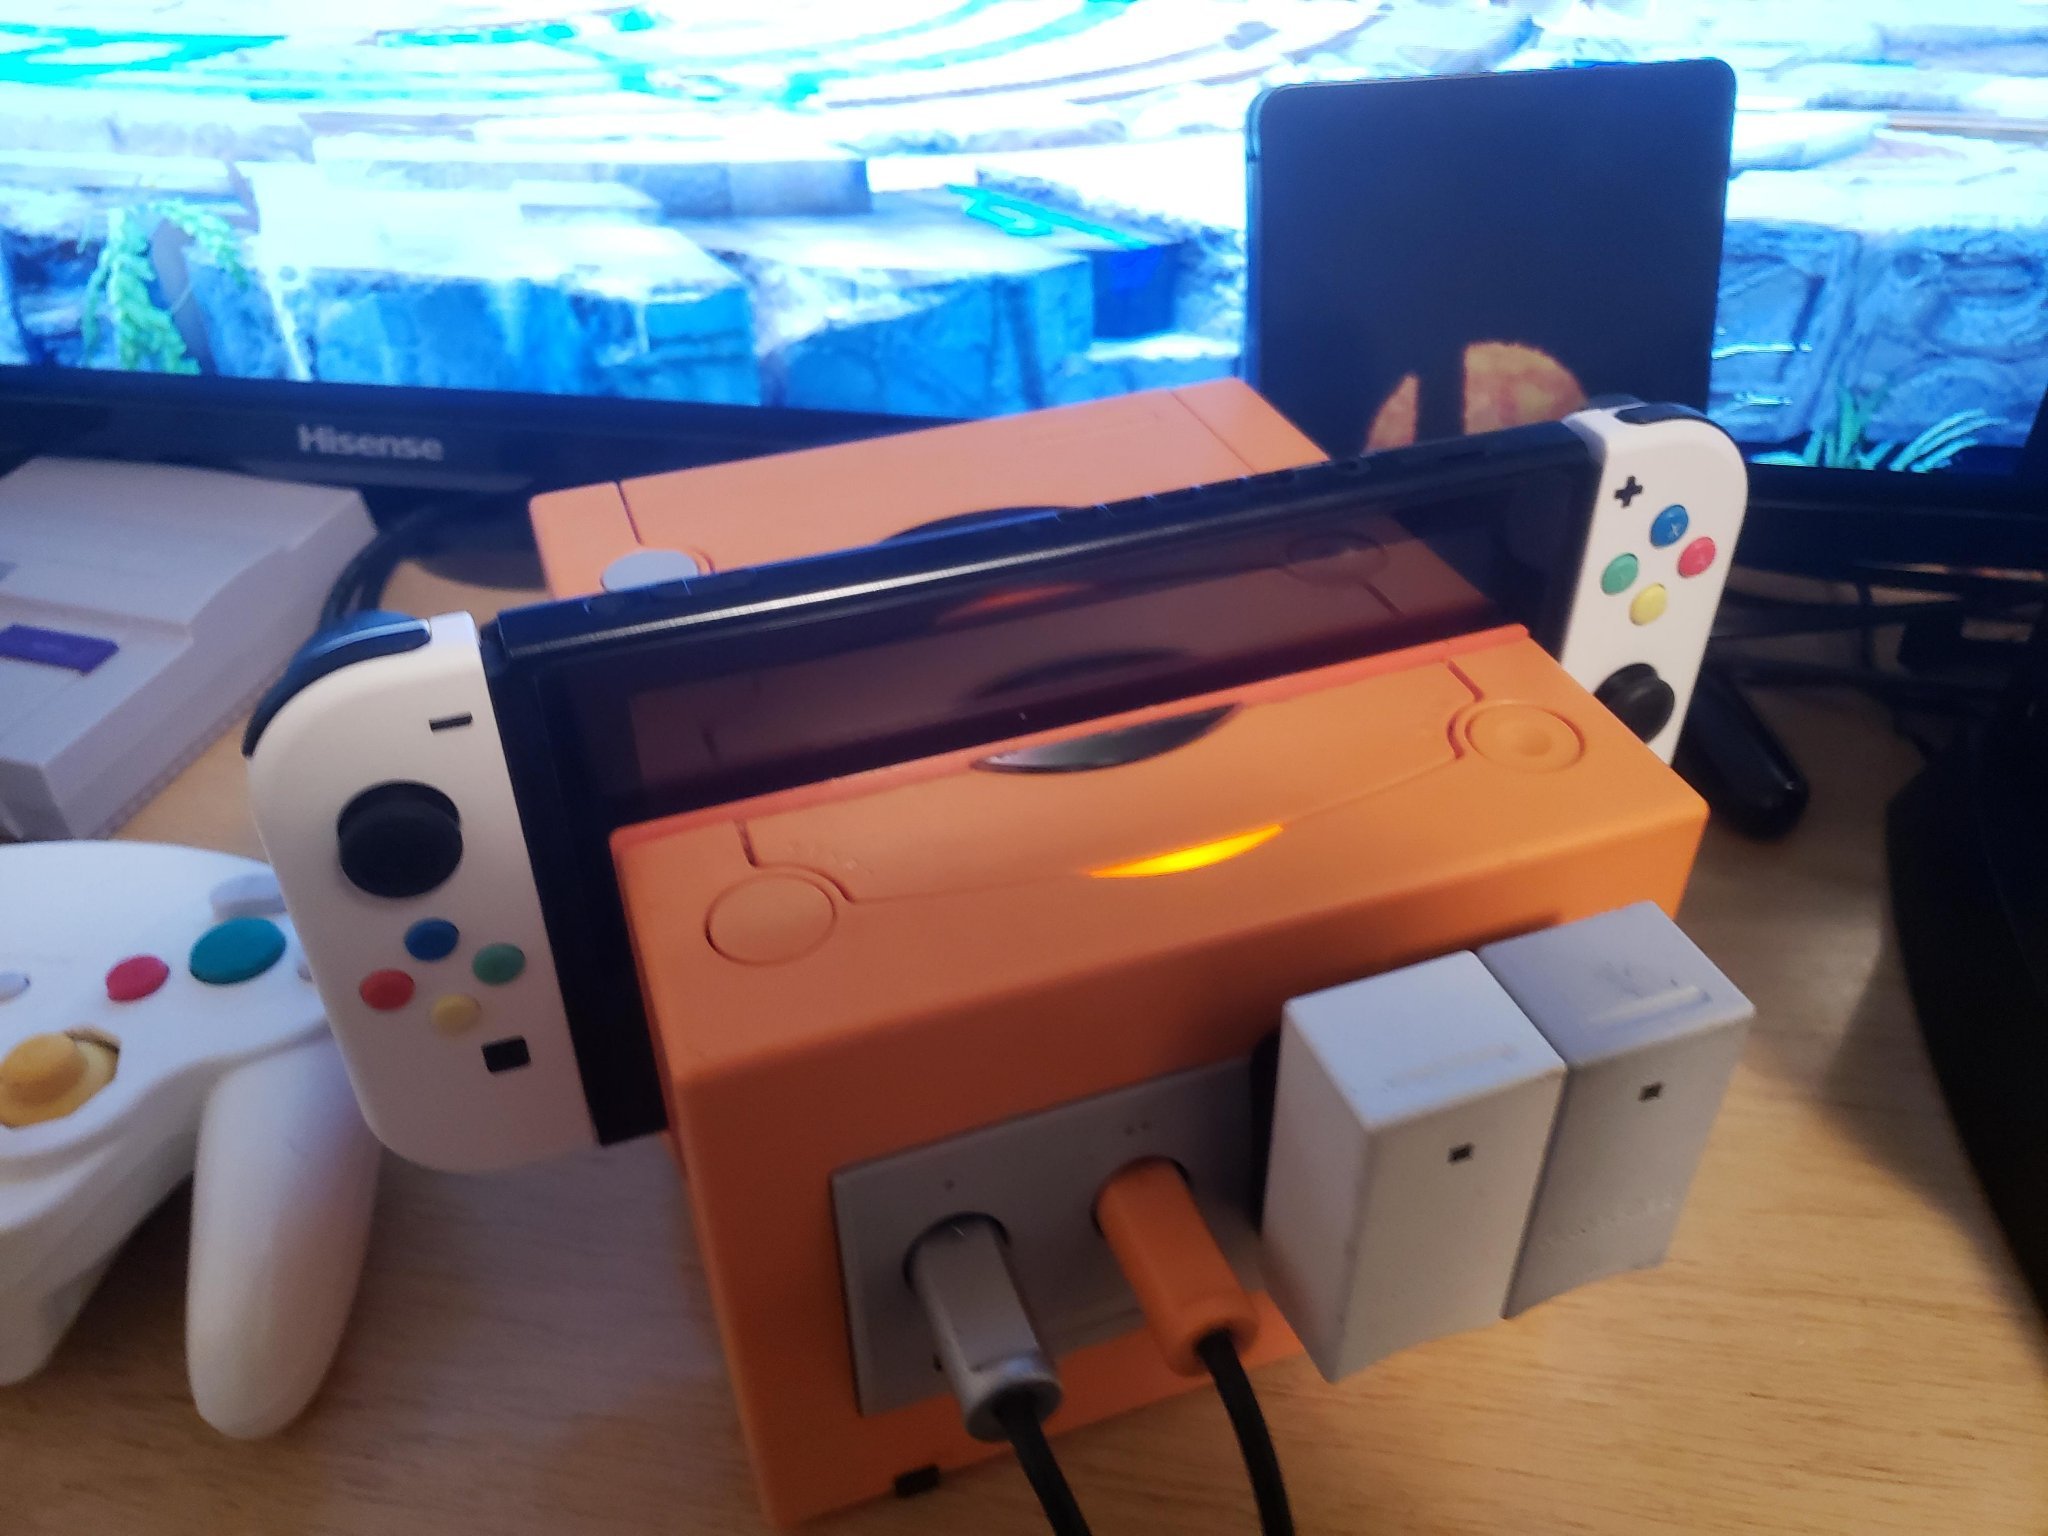 Functional switch dock with usable GameCube inputs - meme